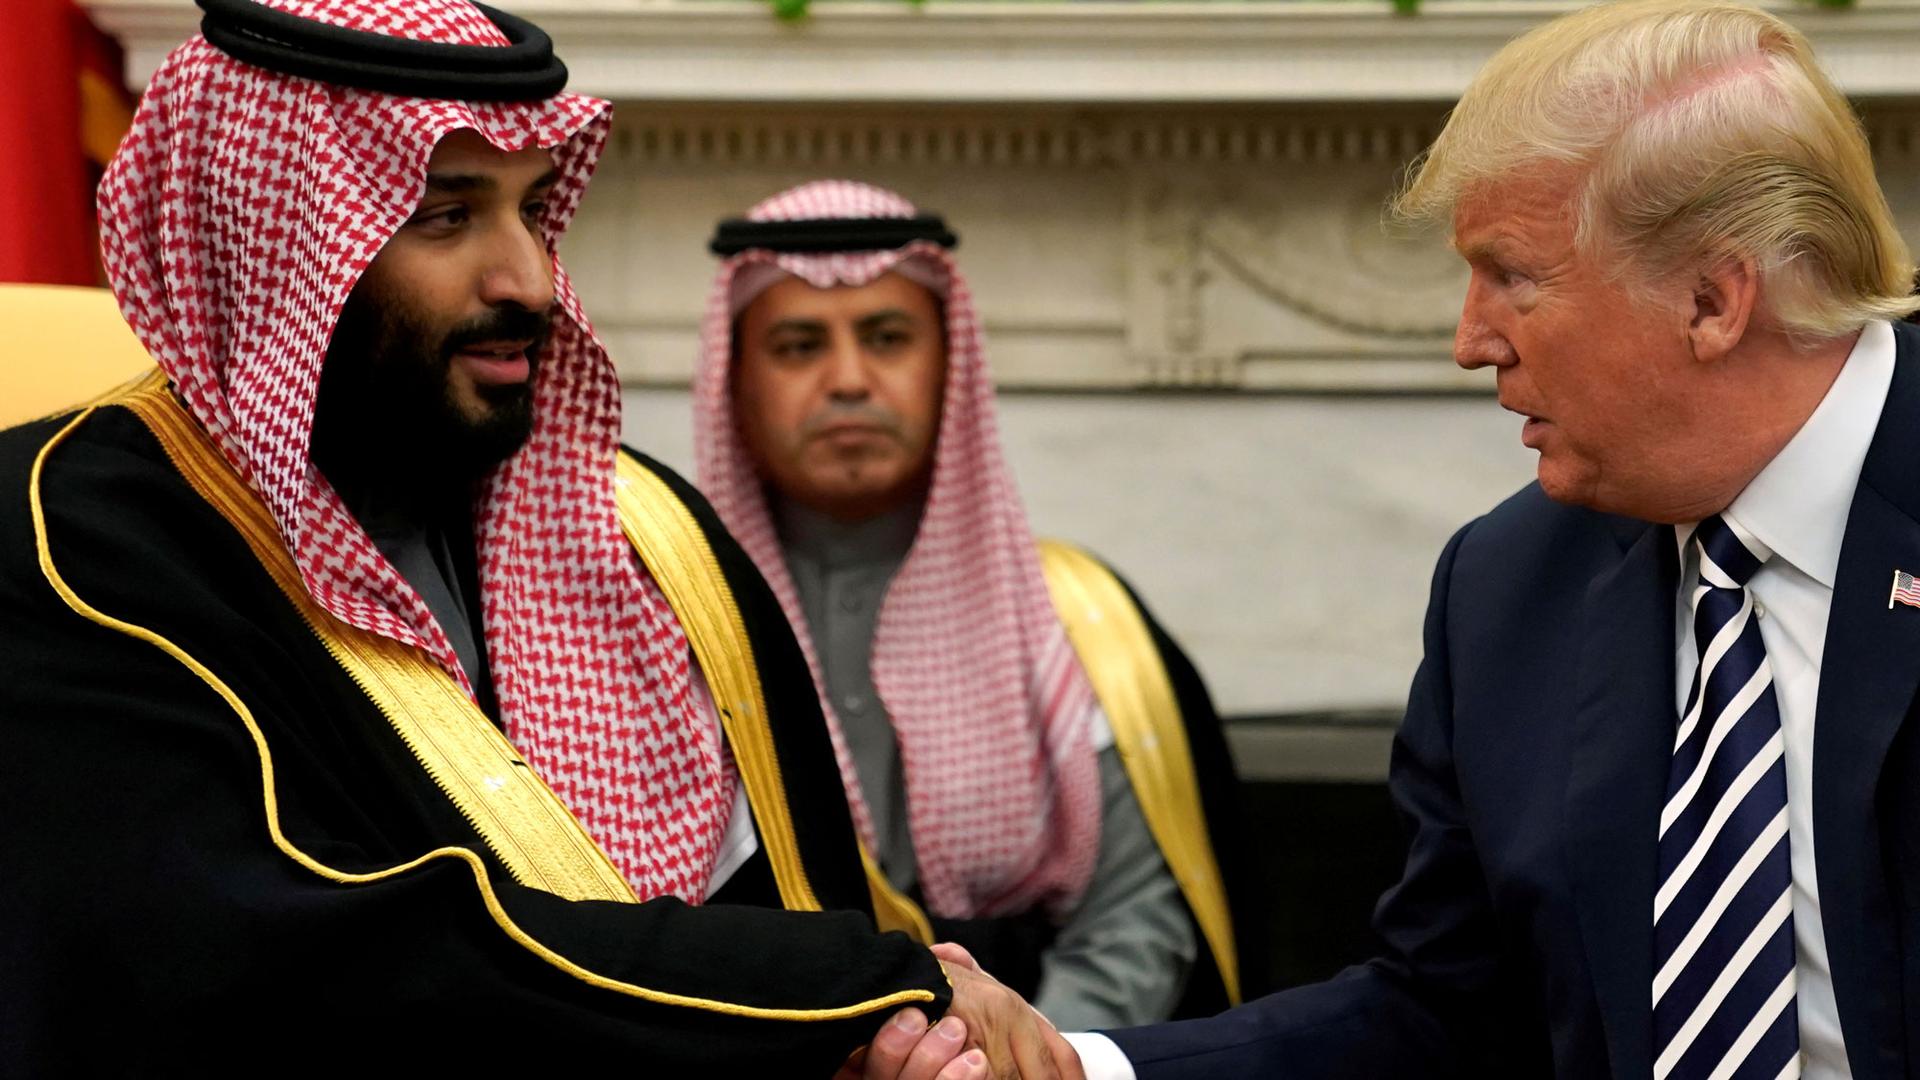 US President Donald Trump is shown shaking hands with Saudi Arabia's Crown Prince Mohammed bin Salman in a medium framed photograph. 